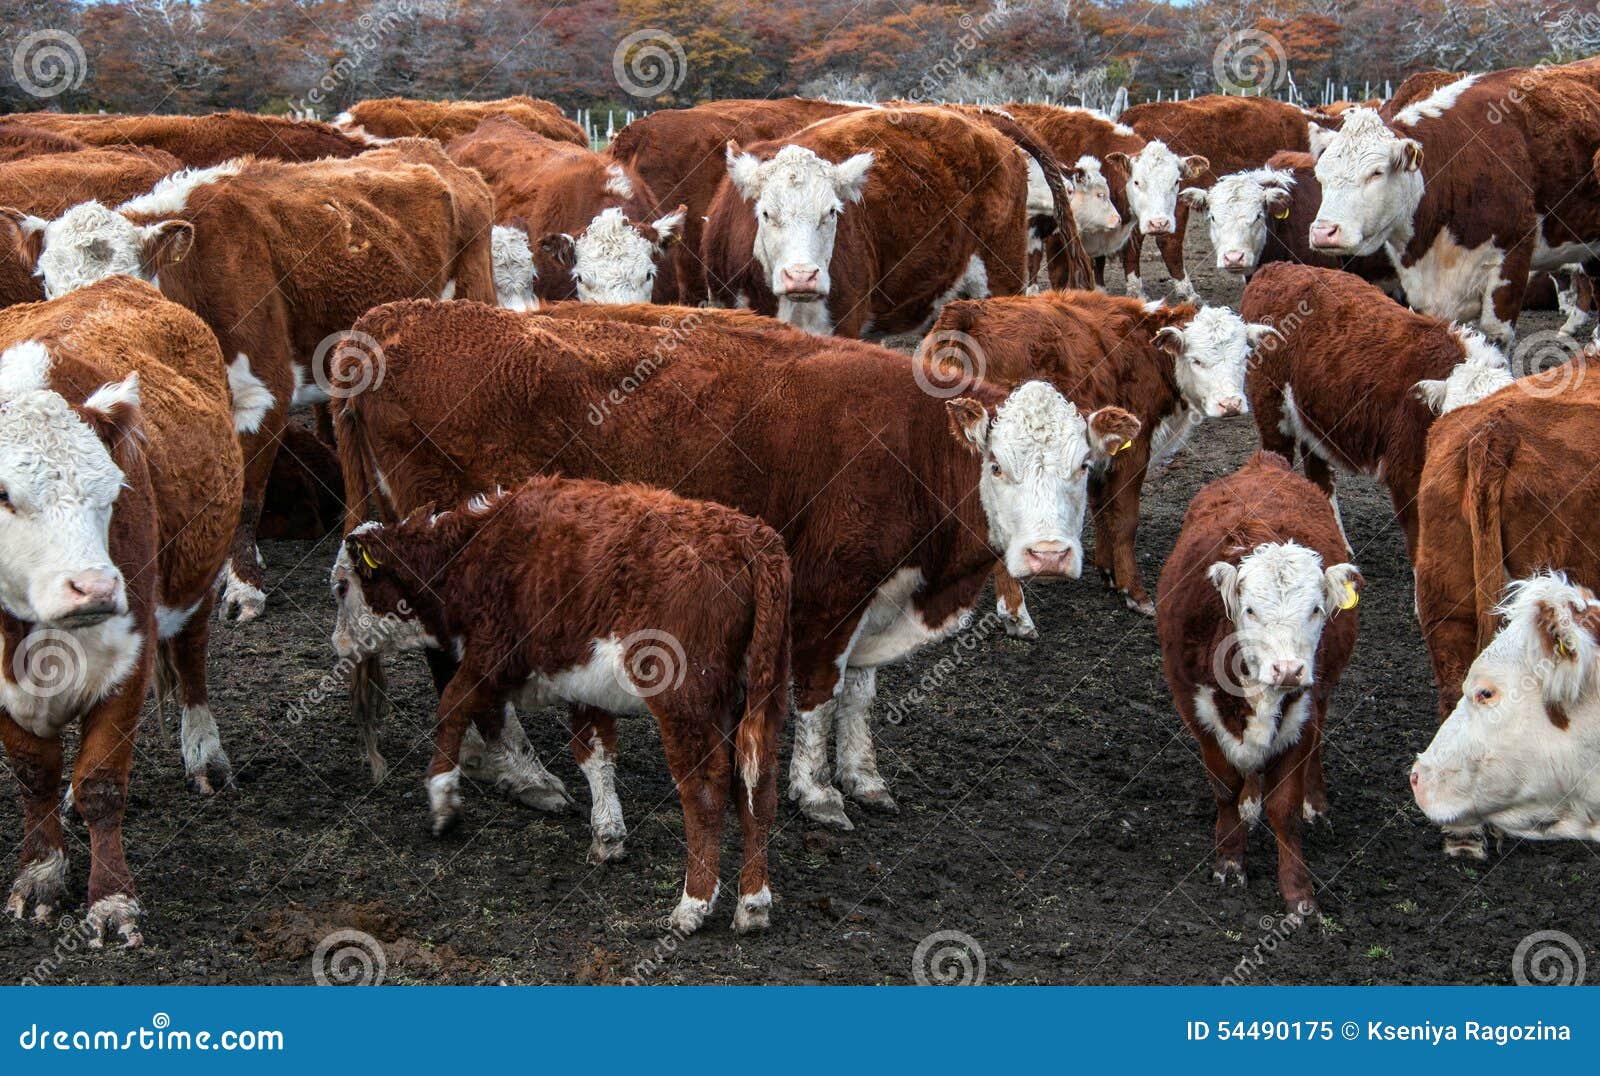 cows of hereford cattle